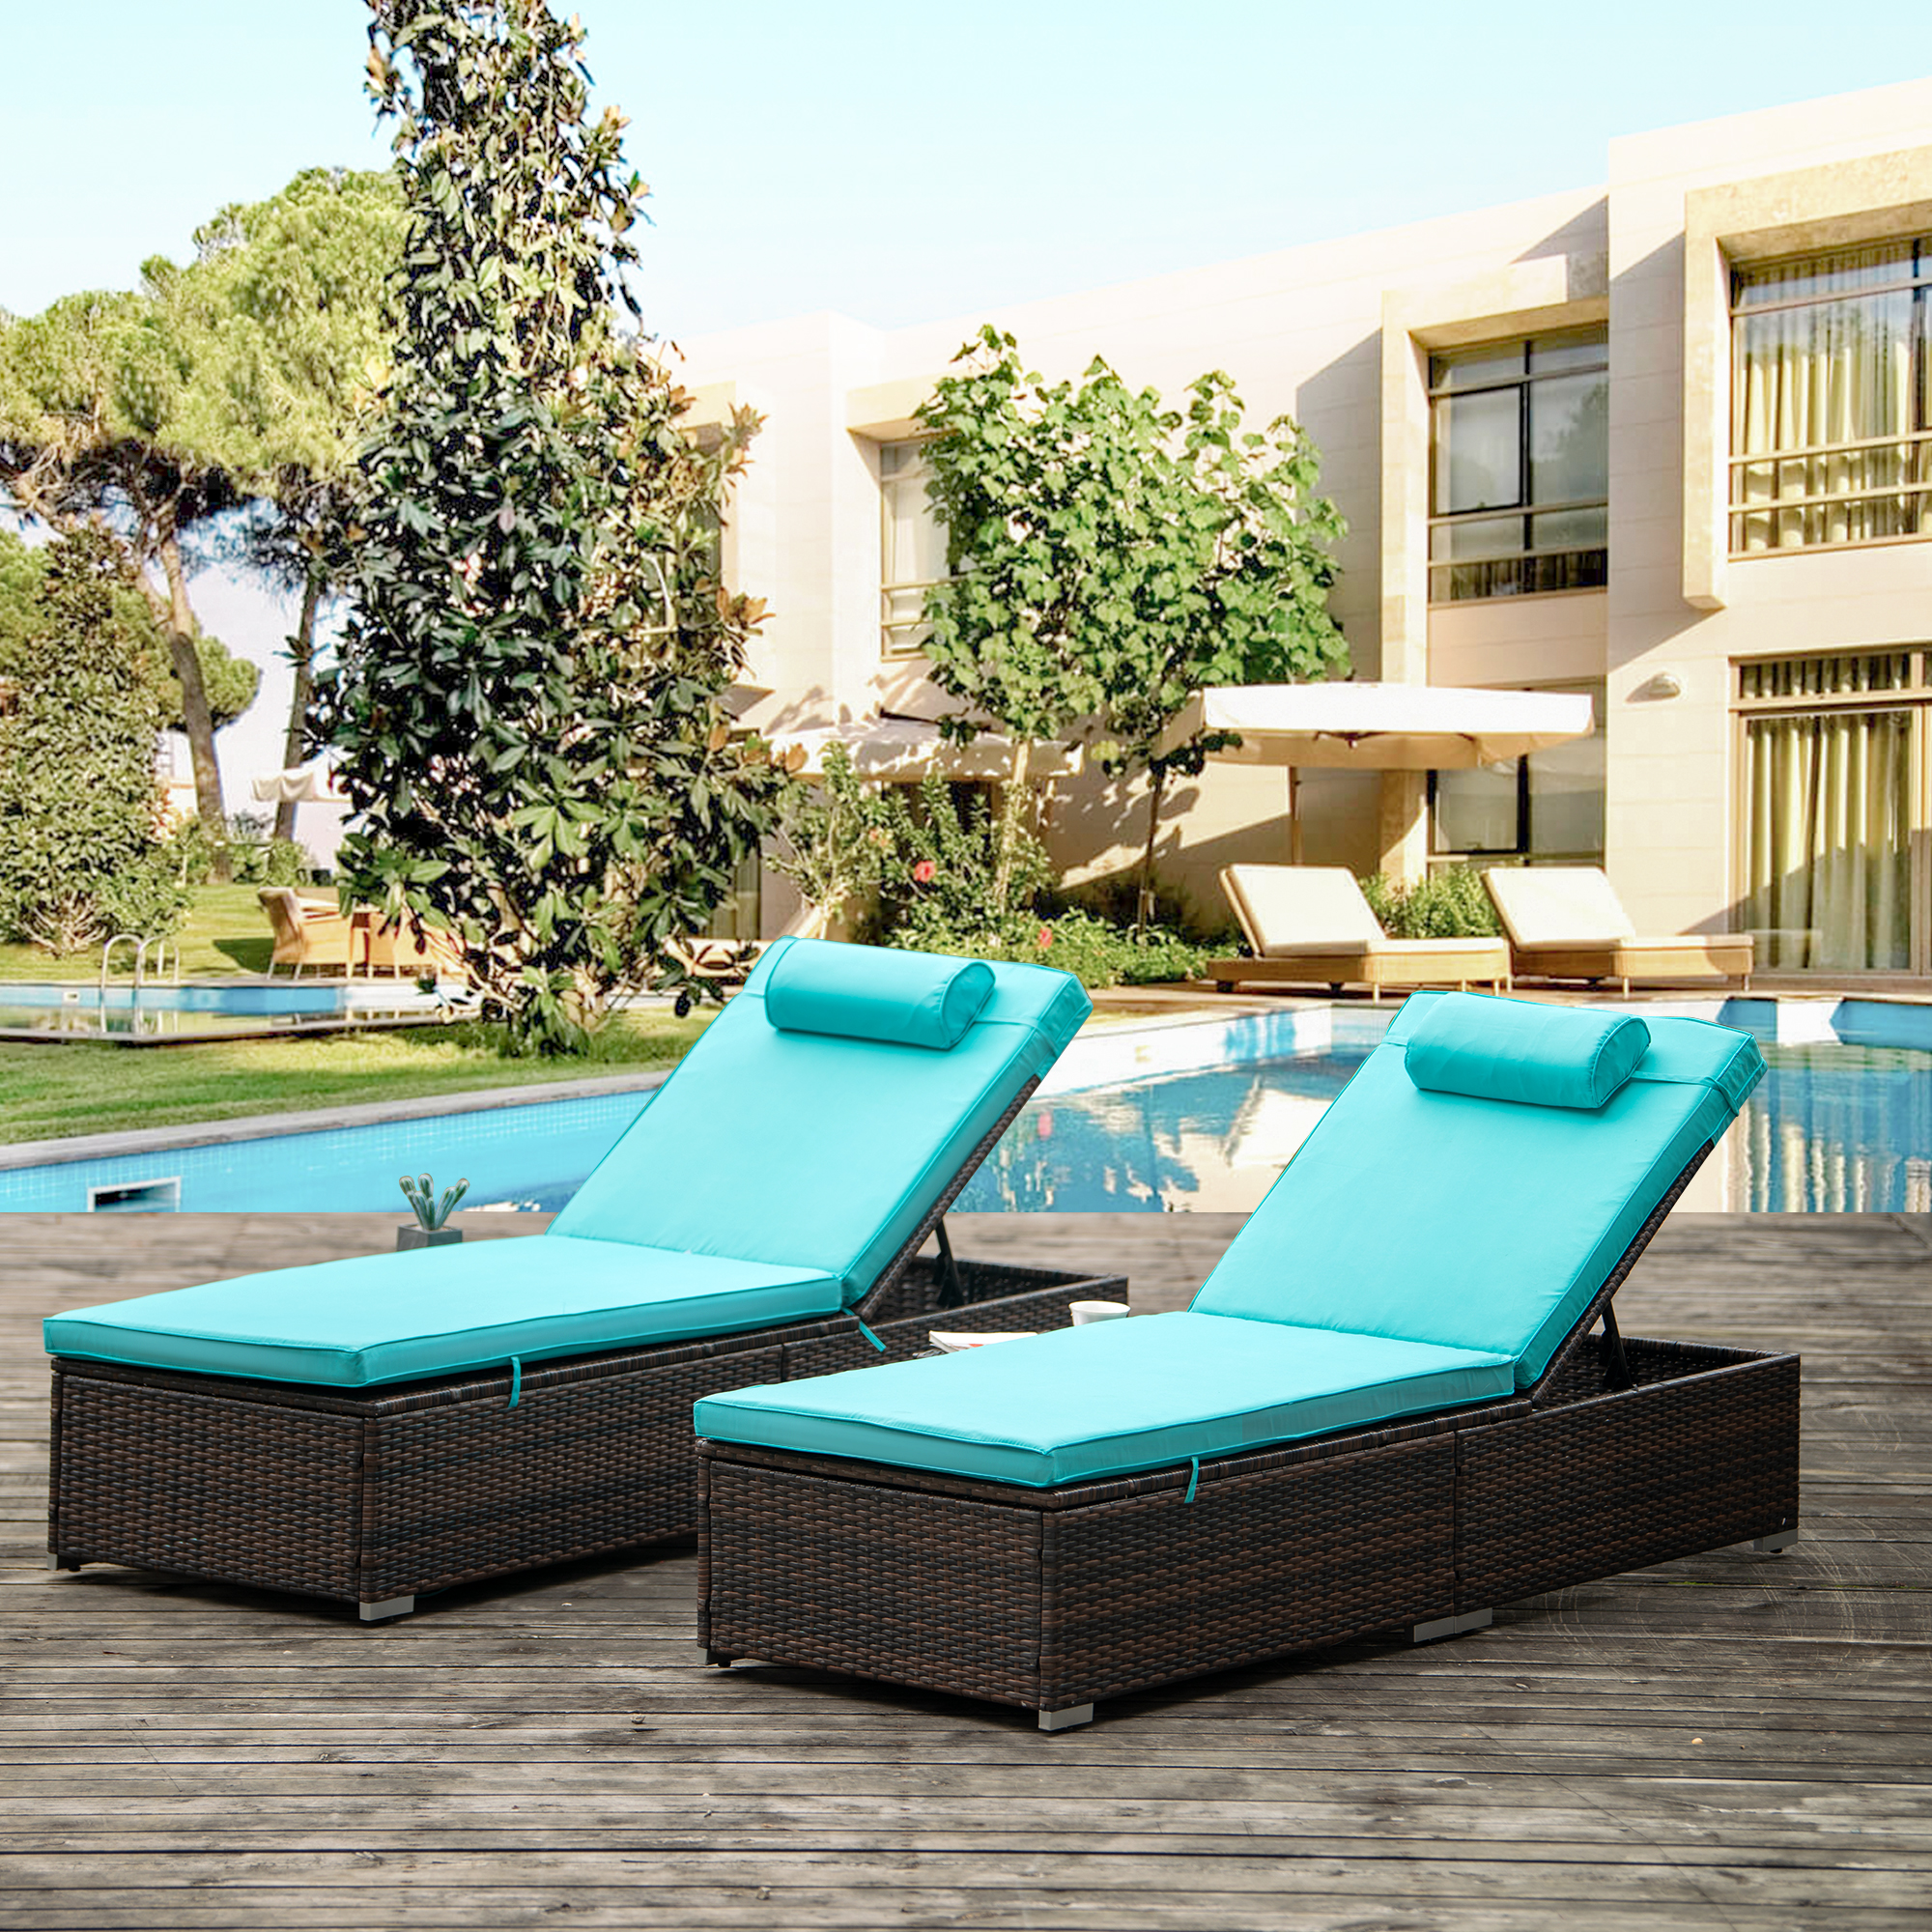 Chaise Lounge Chairs for Outside 2 Pieces, Patio Adjustable Lounge Chairs Set of 2 with Side Table, Outdoor Rattan Wicker Pool Chaise Lounge Chairs Cushioned Poolside Chaise Lounge Set, Blue - image 2 of 10